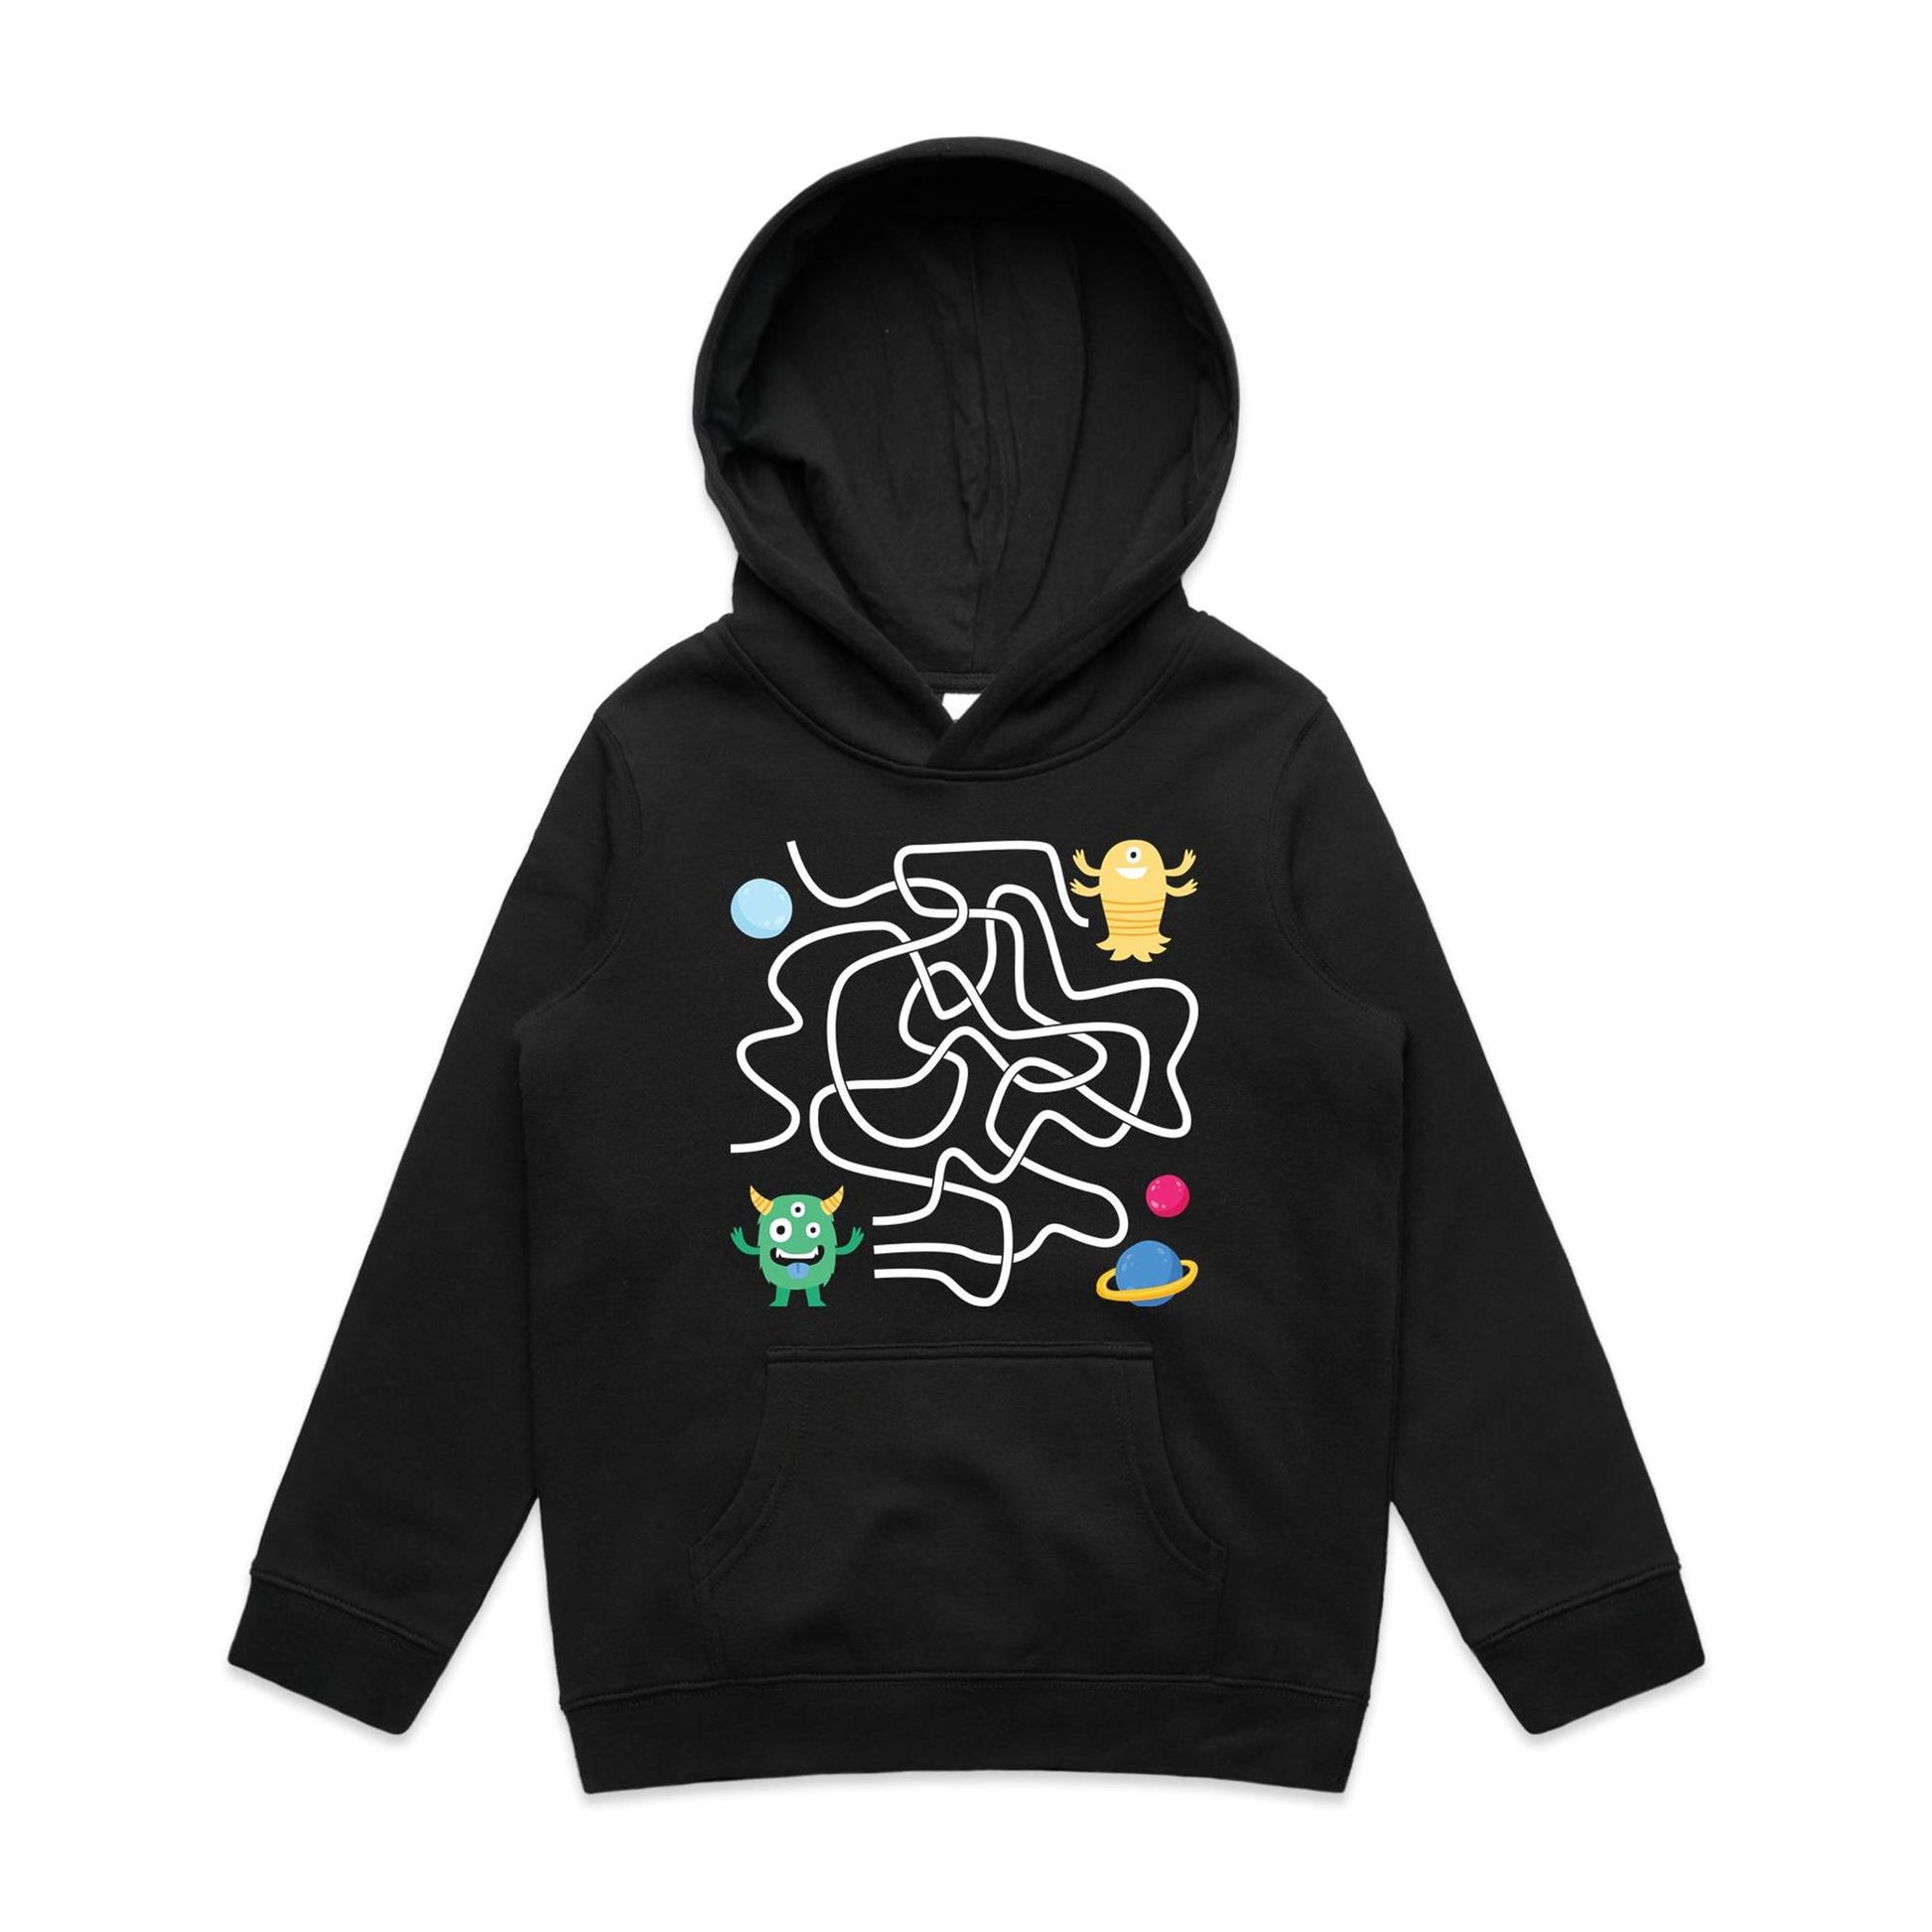 Find The Right Path, Space Alien - Youth Supply Hood Black Kids Hoodie Sci Fi Space